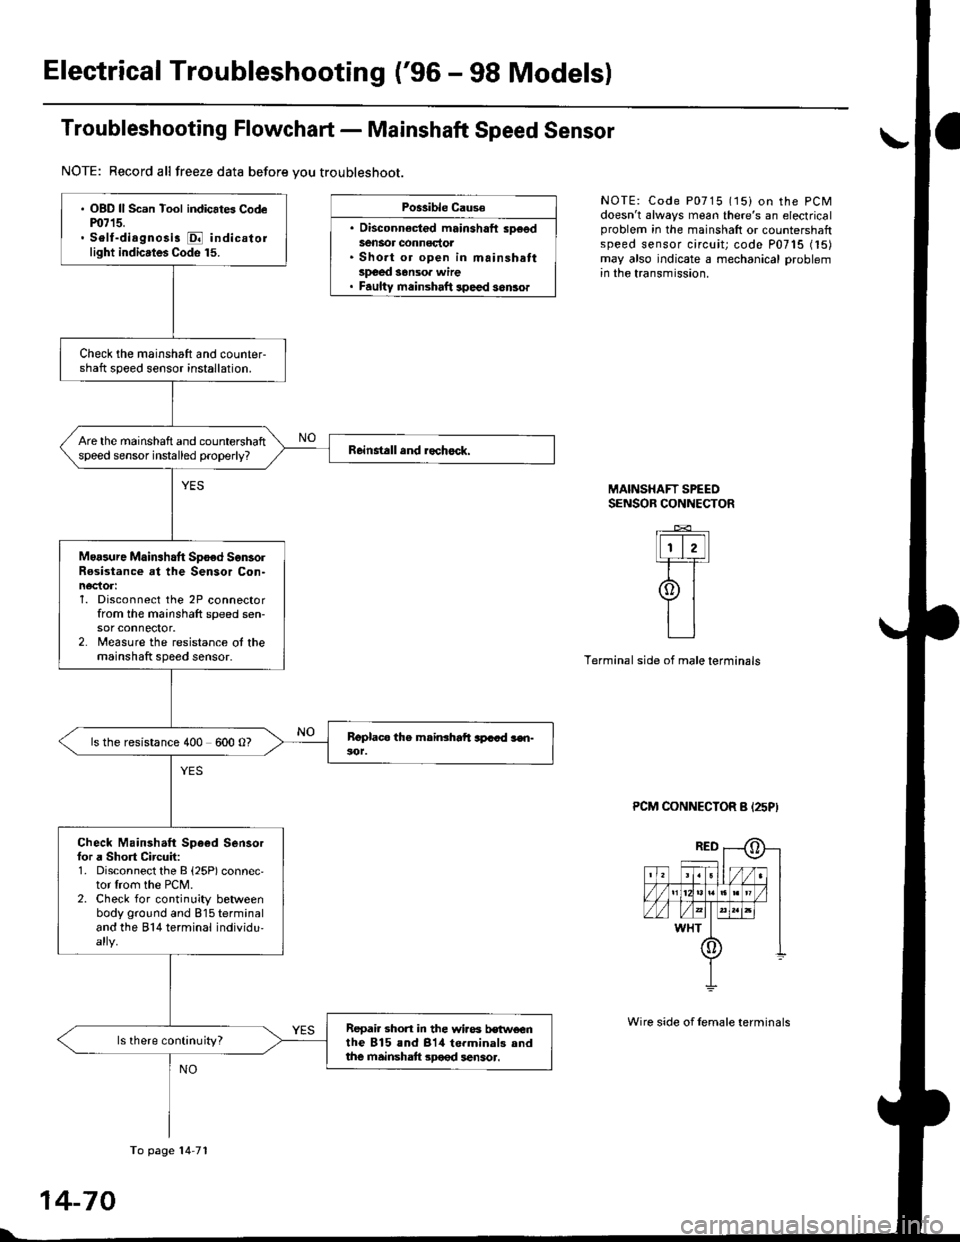 HONDA CIVIC 1997 6.G Service Manual Electrical Troubleshooting (96 - 98 Modelsl
Troubleshooting Flowchart - Mainshaft Speed Sensor
NOTE: Record all freeze data before you troubleshoot.
Po$ible Cause
. Disconnect€d mainshaft sD€edSe